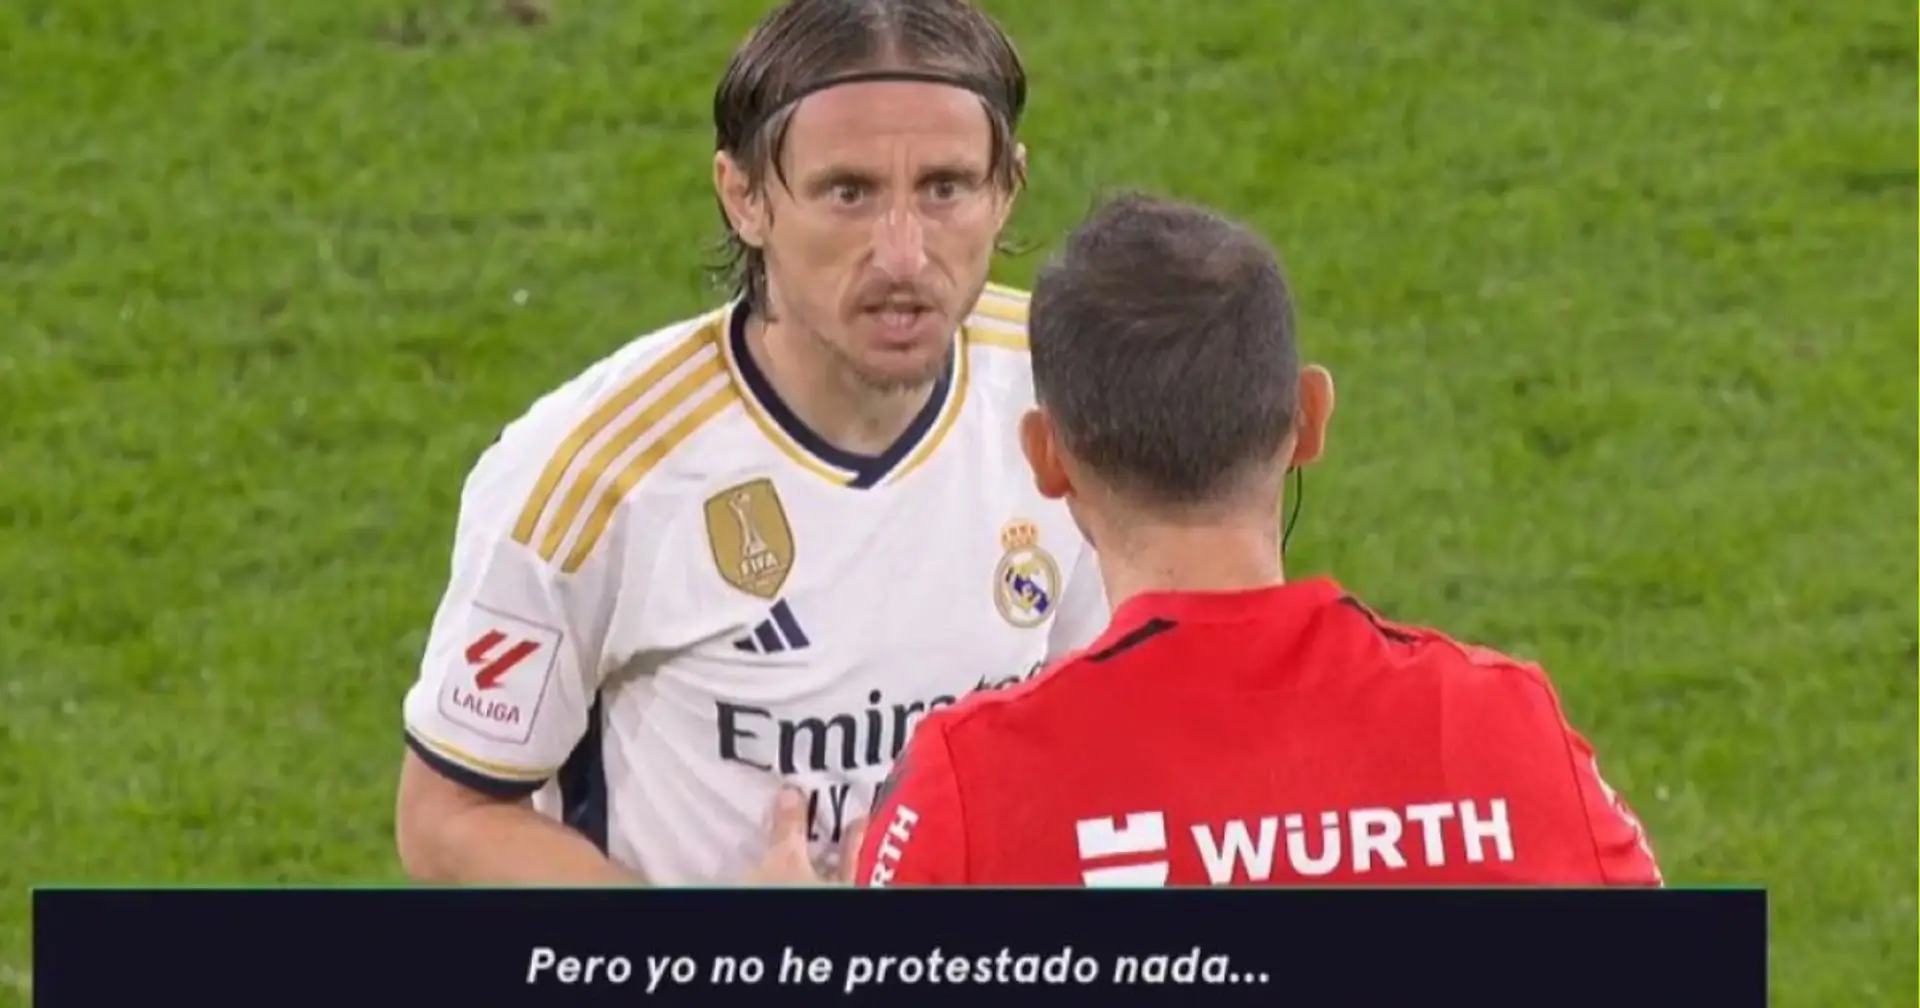 'I can't talk?': What Luka Modric said to referee in Cadiz game picked up by mics